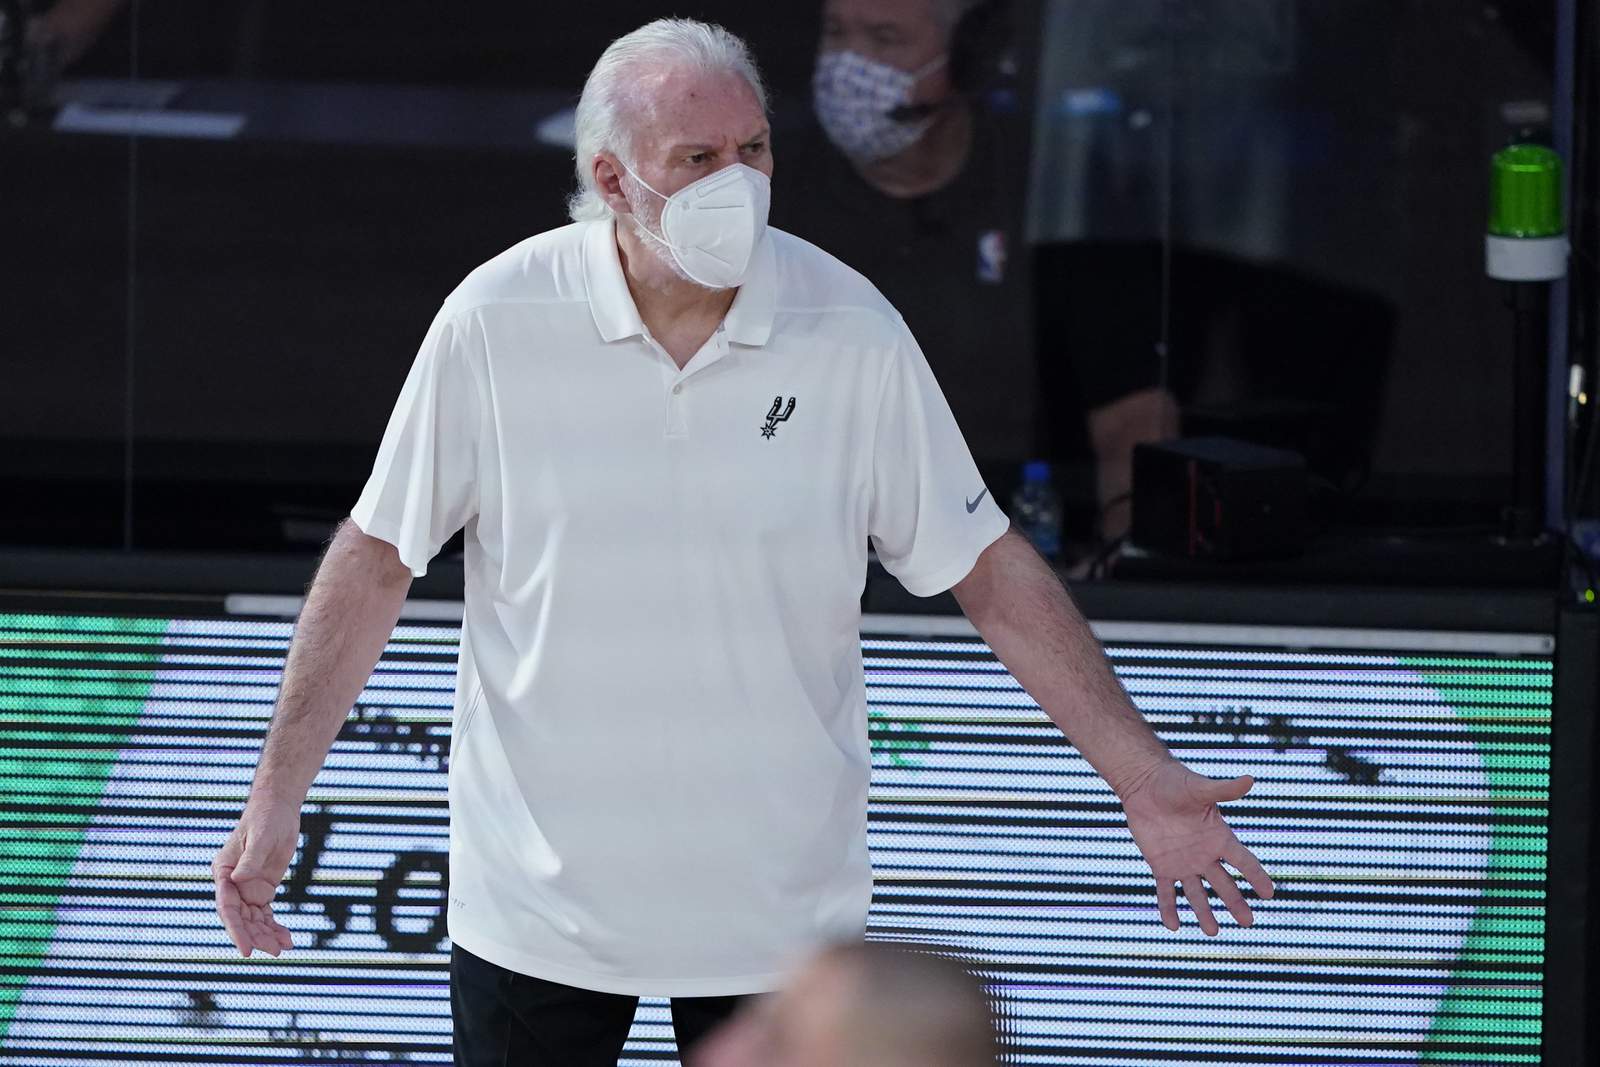 NBA coaches attire: Masks are in, jackets are optional